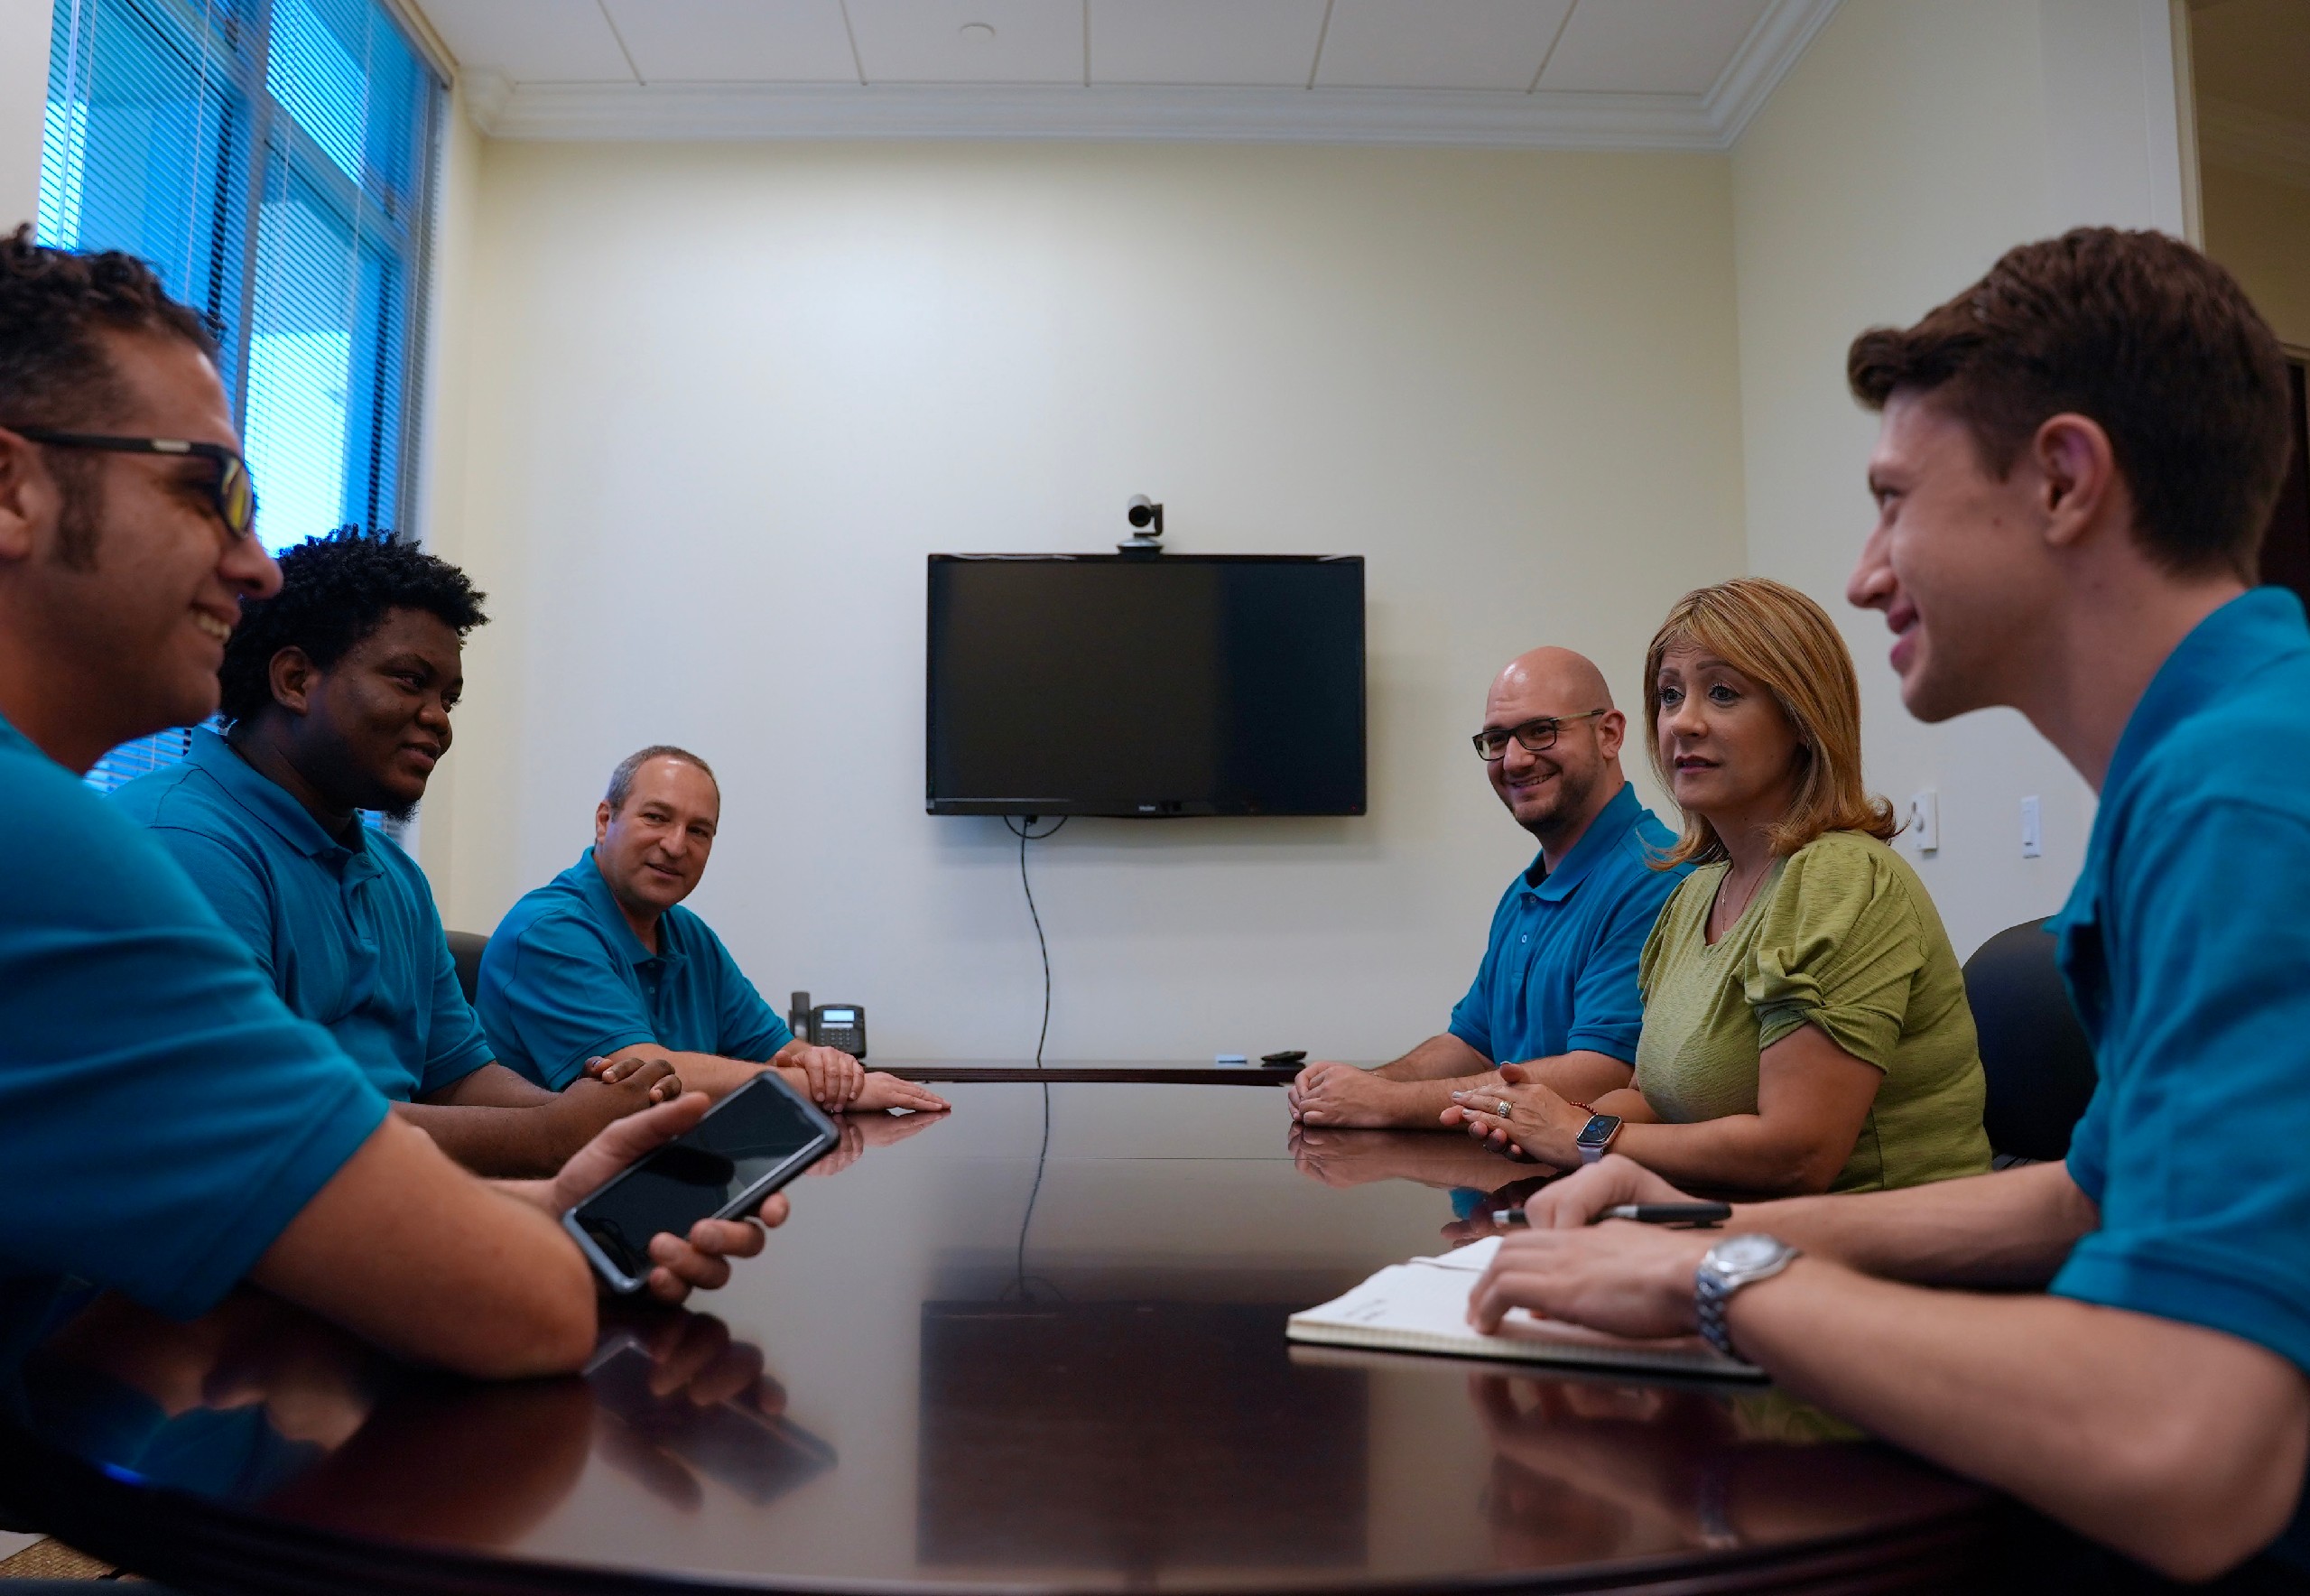 The Blue Light IT team meeting to discuss cybersecurity.